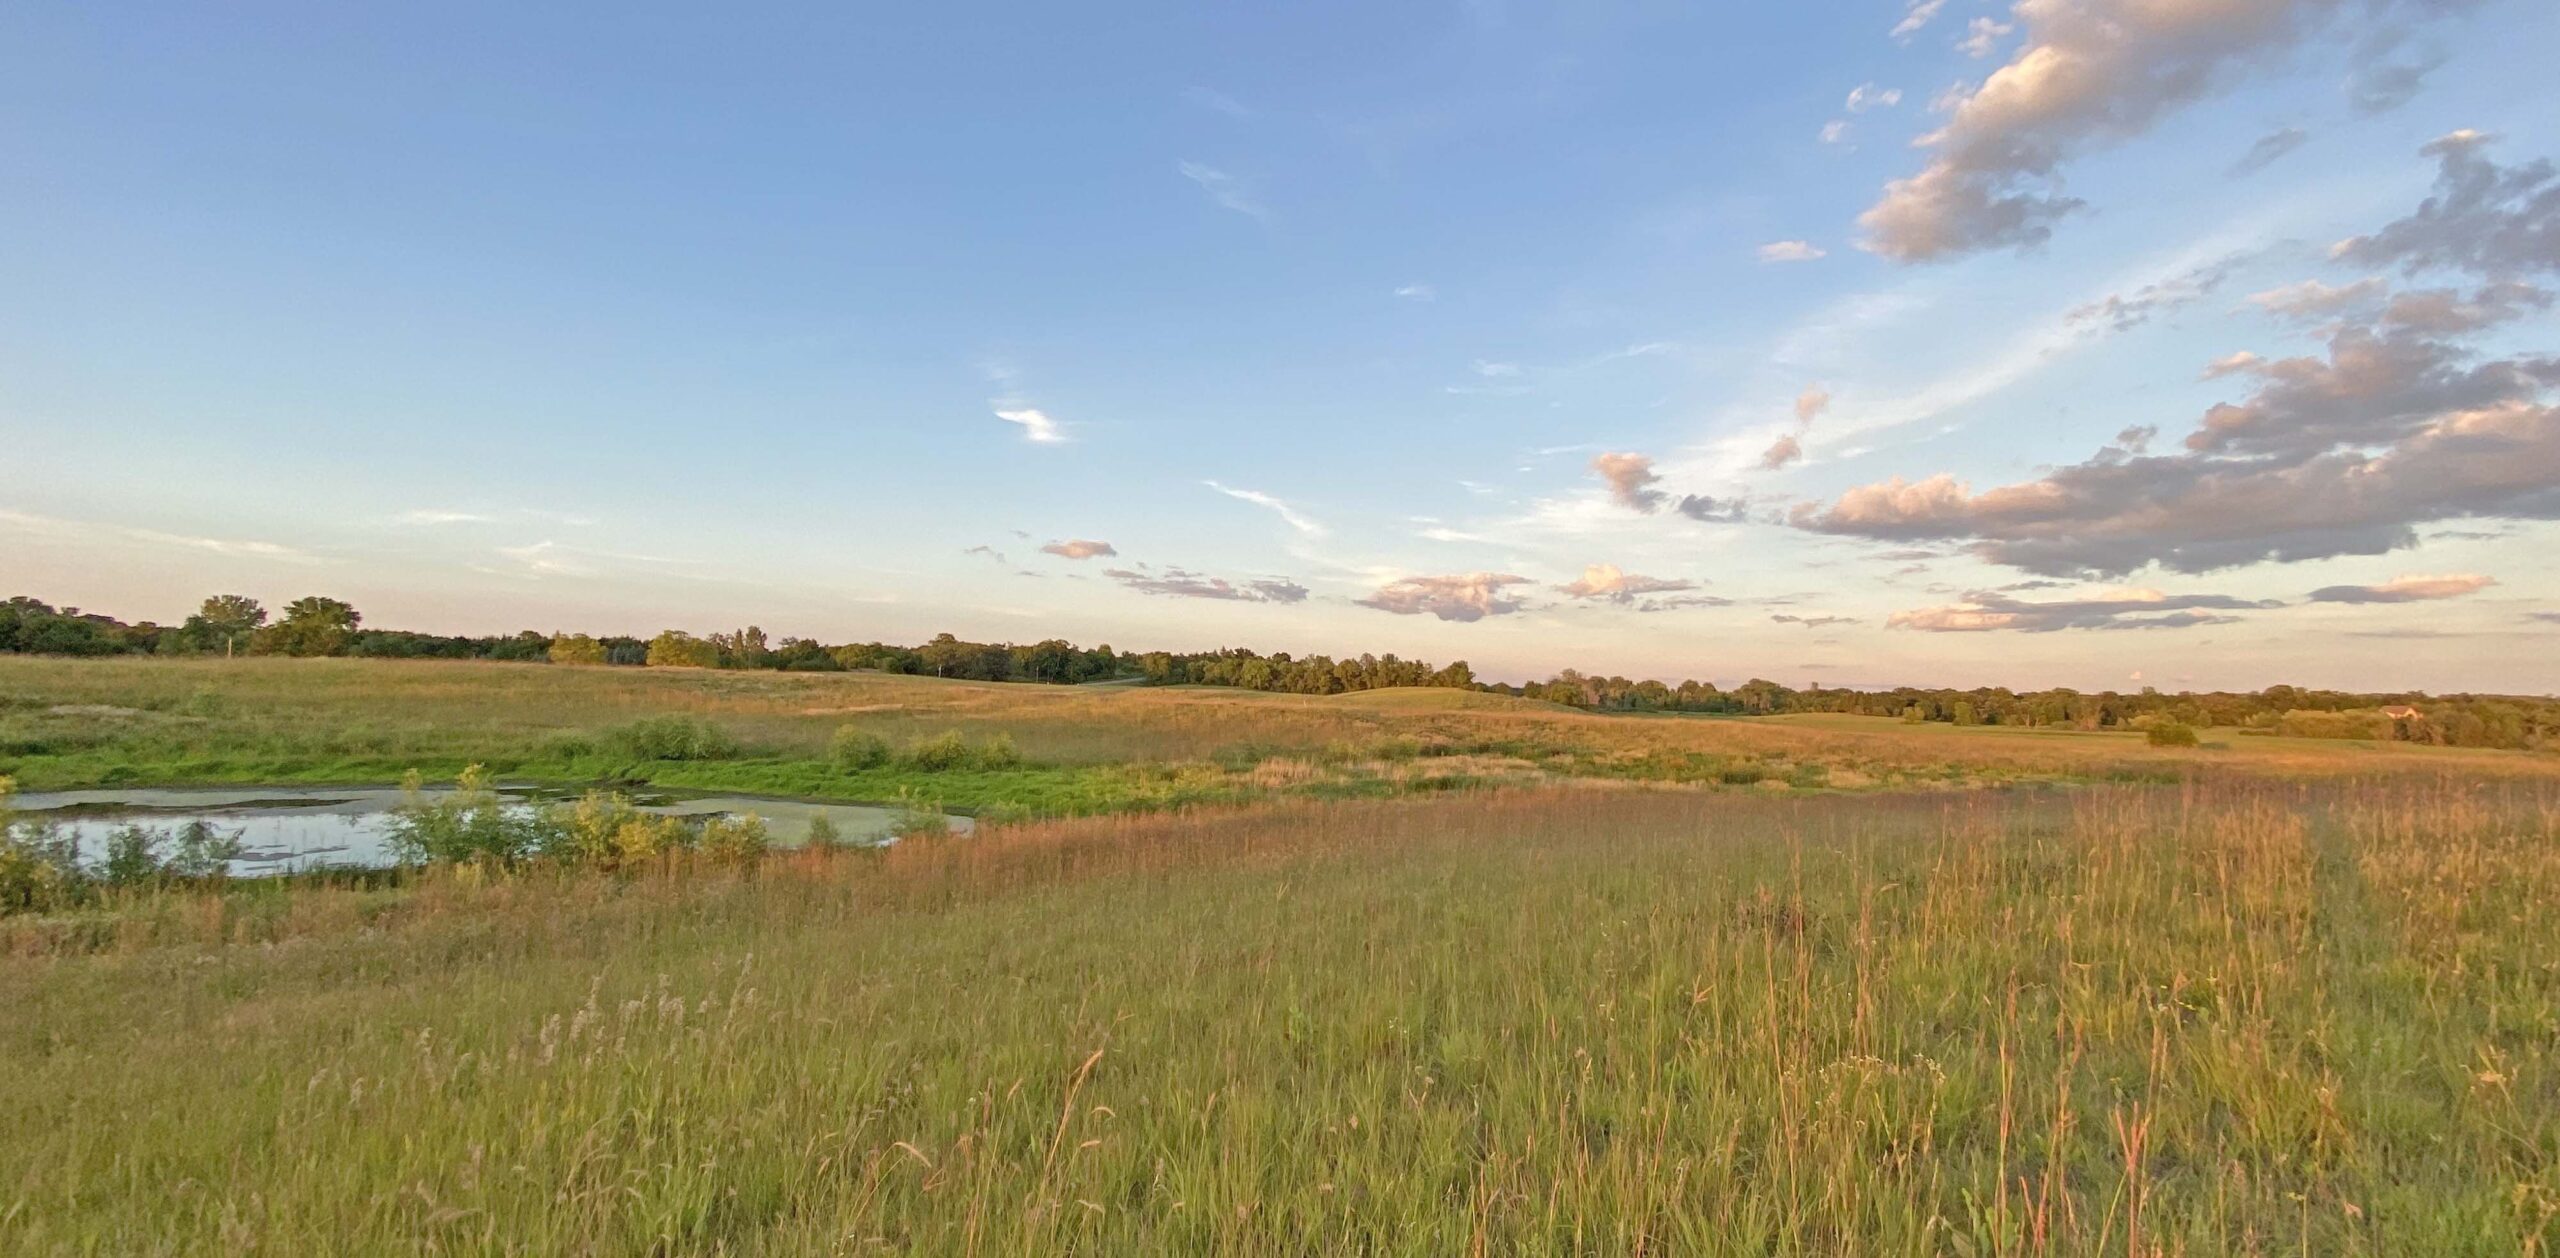 Our expert natural landscaping services create prairies just like this one